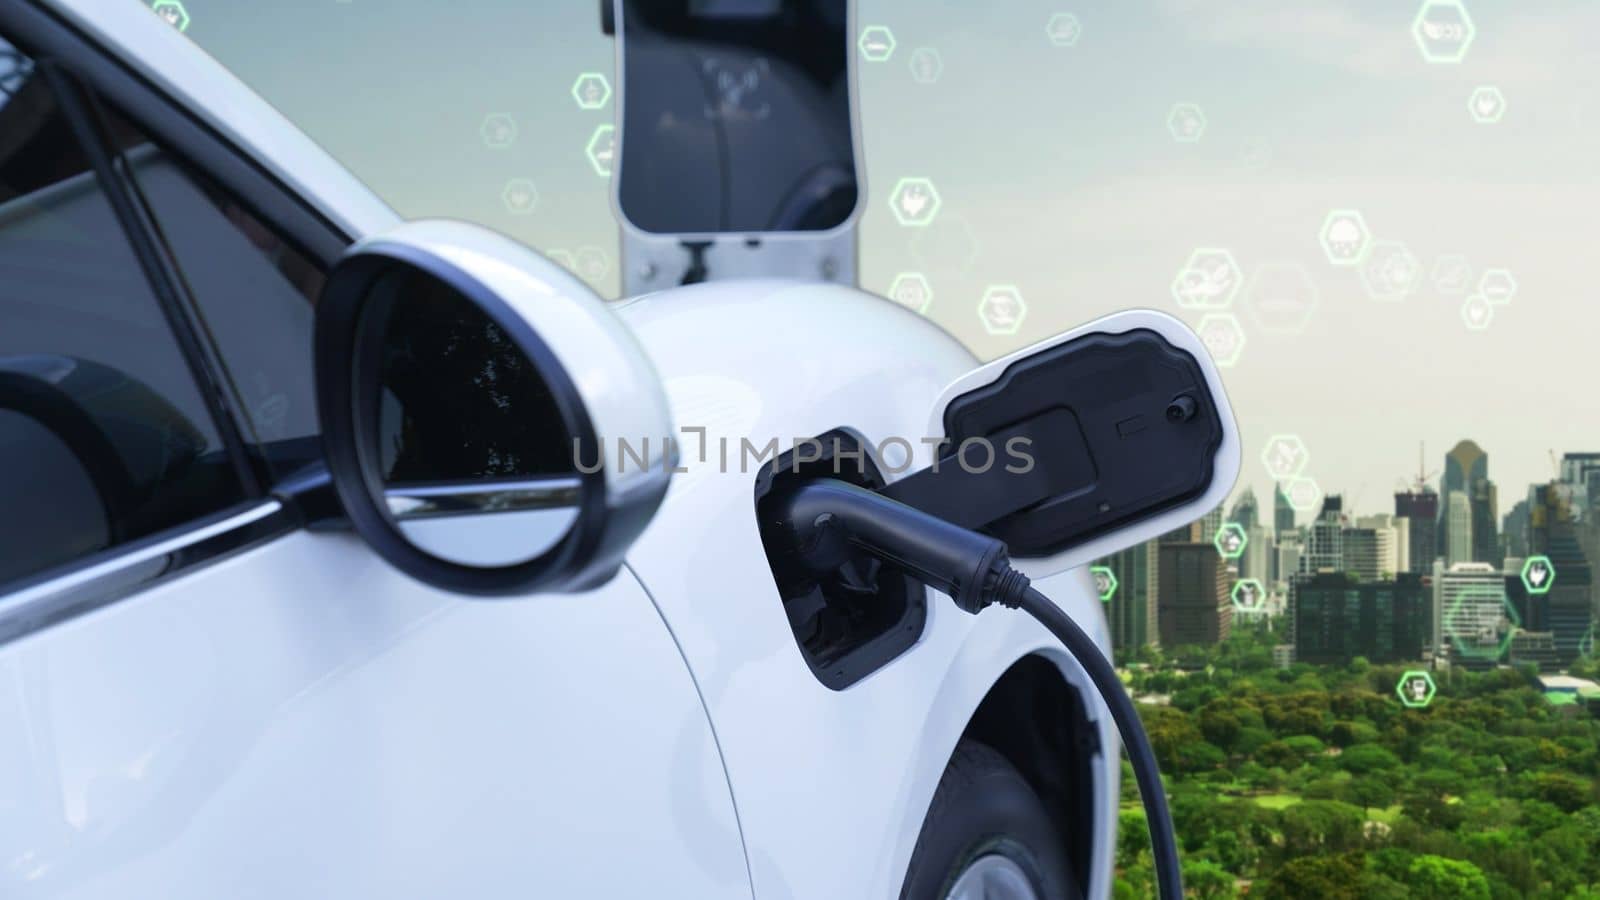 Progressive green city ESG symbol background with electric vehicle, EV car recharge energy at the charging point to increase environmental awareness with renewable energy powered transportation.